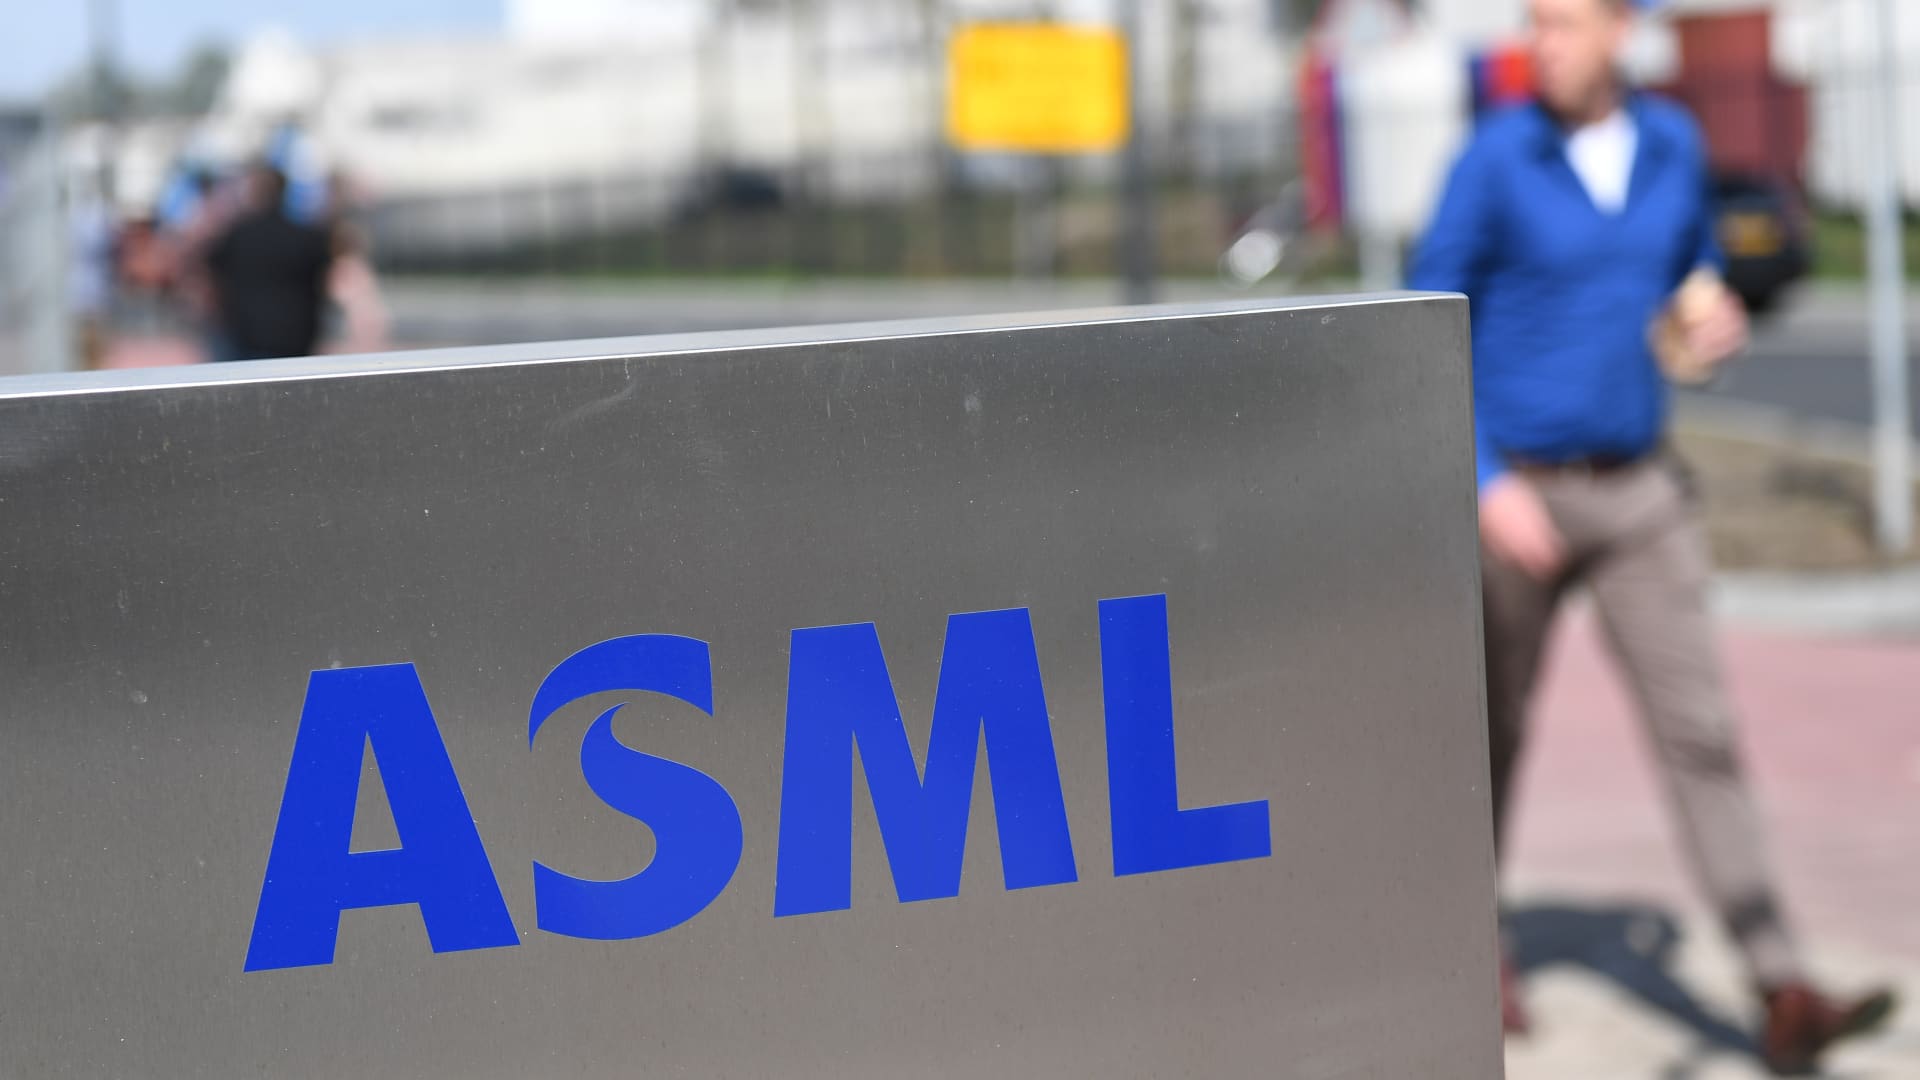 ASML blocked from exporting some critical chipmaking tools to China